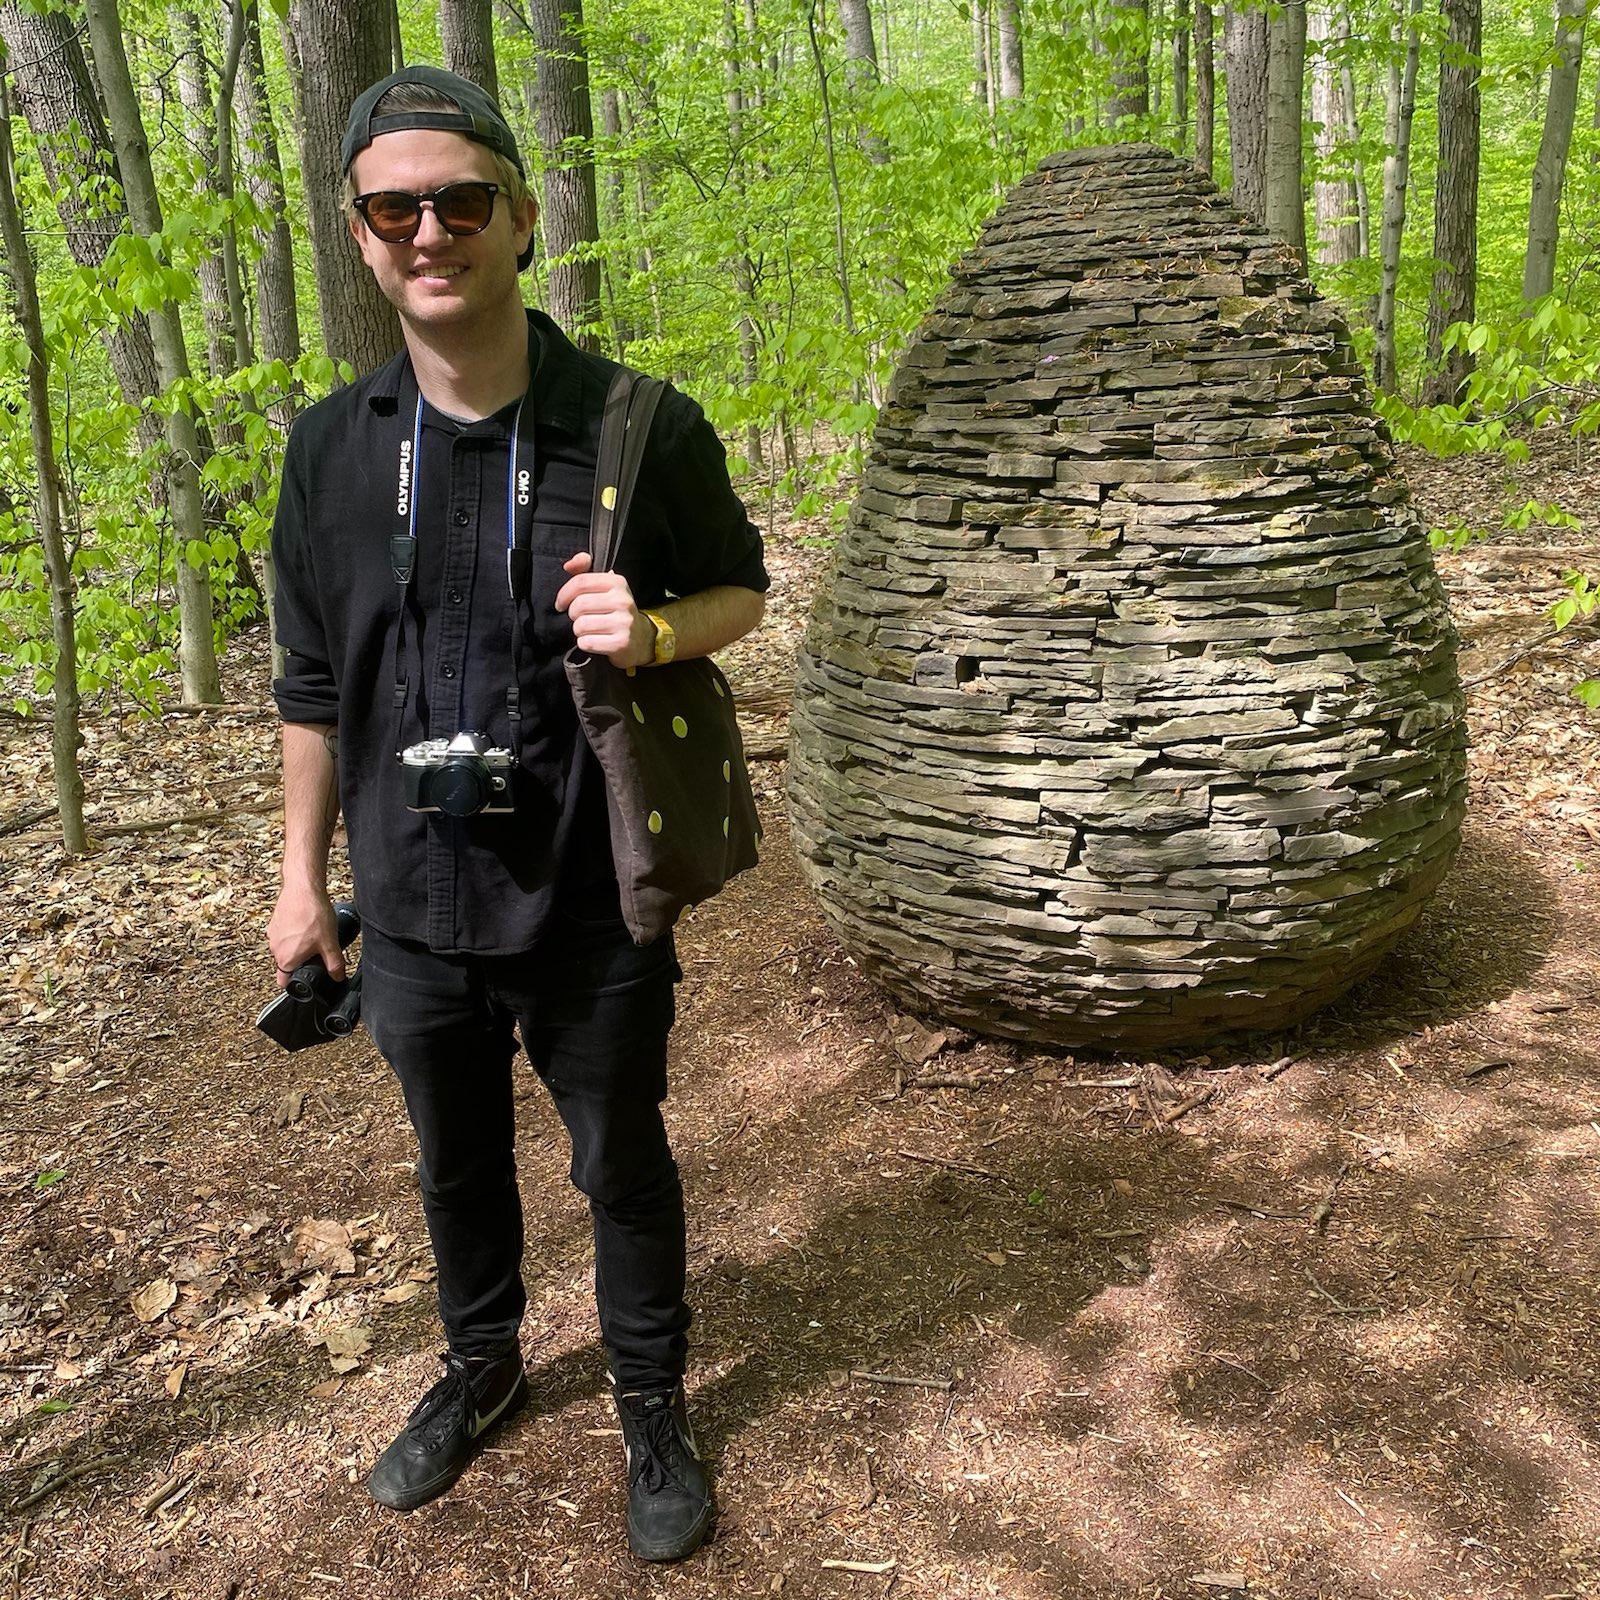 Parker Higgins in sunglasses standing in a forest with a tote bag over his shoulder and a mirrorless camera hanging around his neck. Behind him, a cairn built by Andy Goldsworthy.